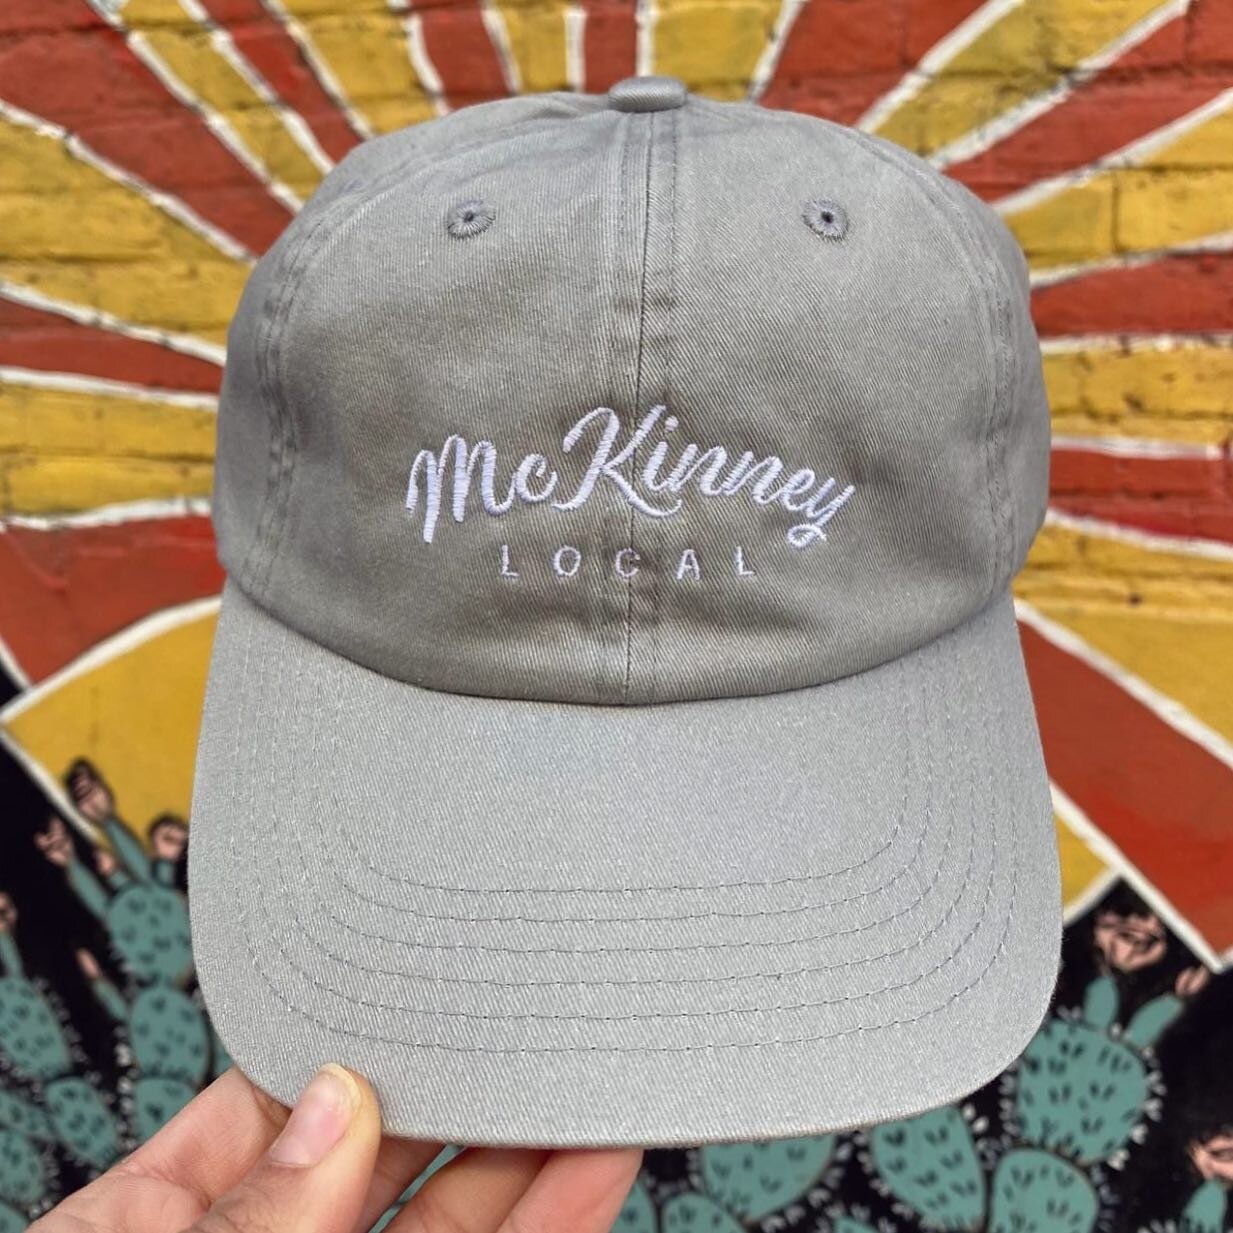 McKinney locals!! Look at this cute hat!!Loved collaborating with the talented @tewlipdesigns showing the love for our little town! 💖
&bull;
Grab one on pre-sale today!! 🌟🧢
&bull;
#lifebeautifullydesigned #mckinneylocal #tewlipdesigns #mckinneymer